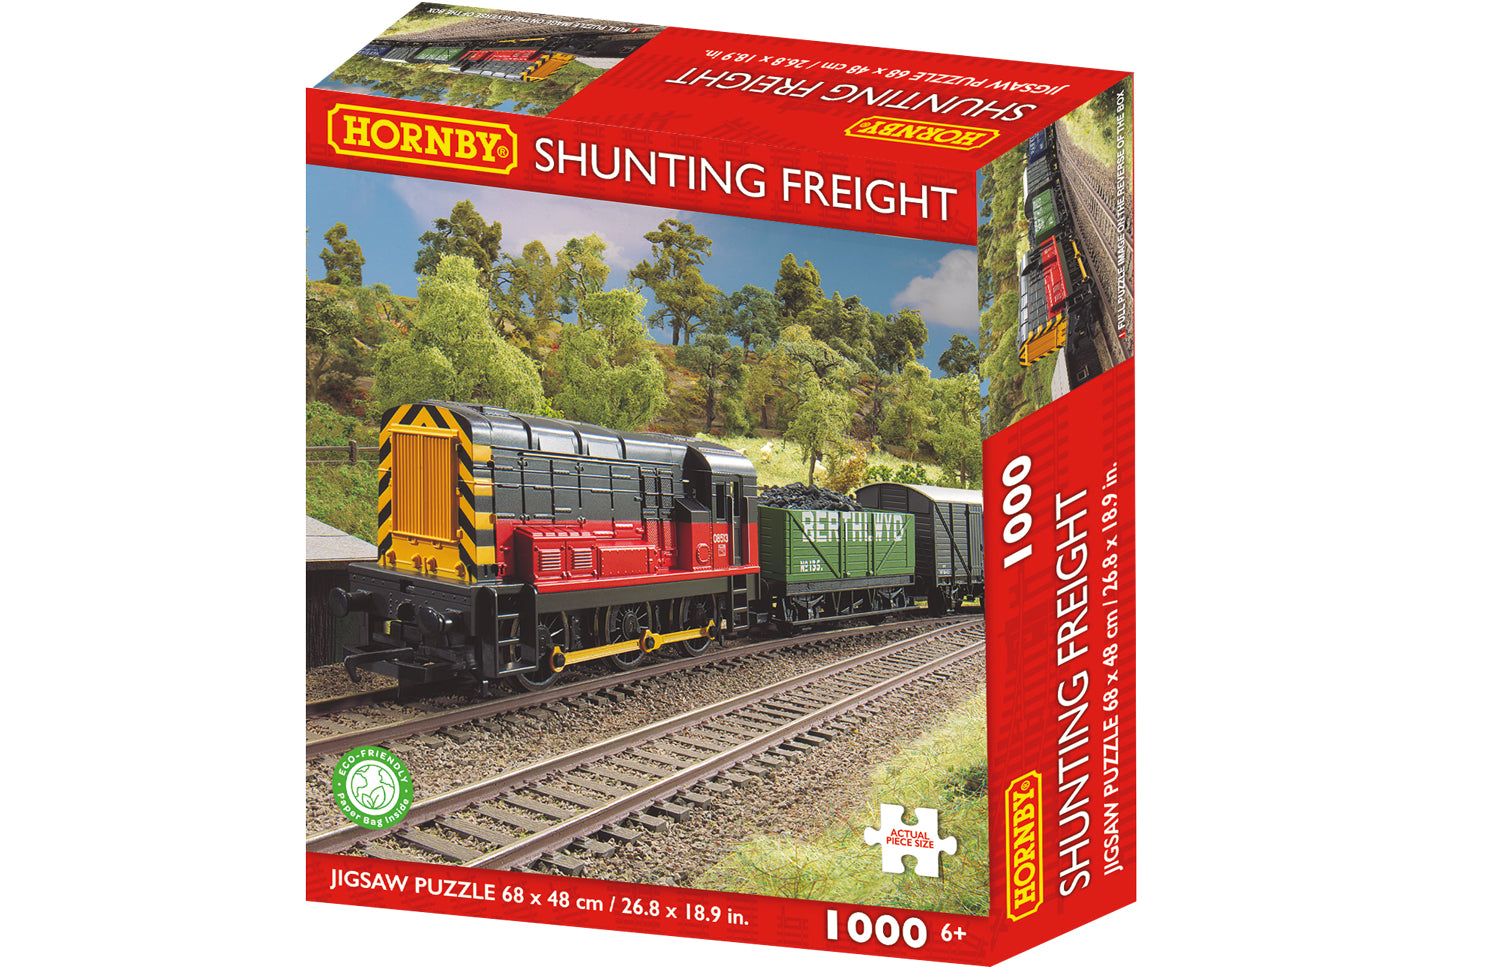 Hornby Full Shunting Freight 3D 1000 piece Jigsaw Puzzle - Chester Model Centre